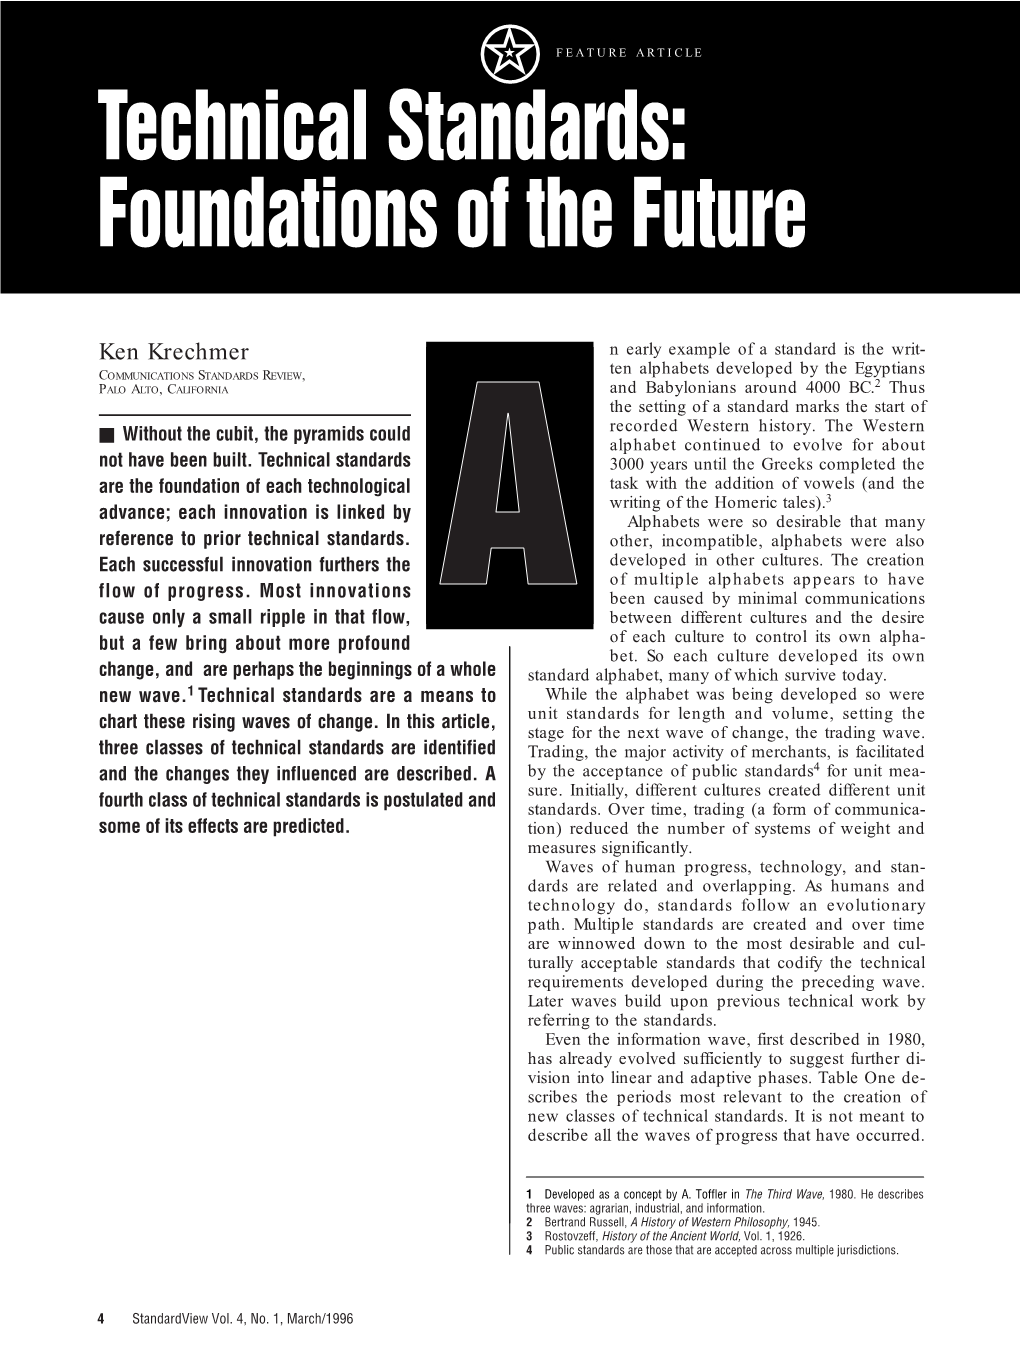 Technical Standards: Foundations of the Future